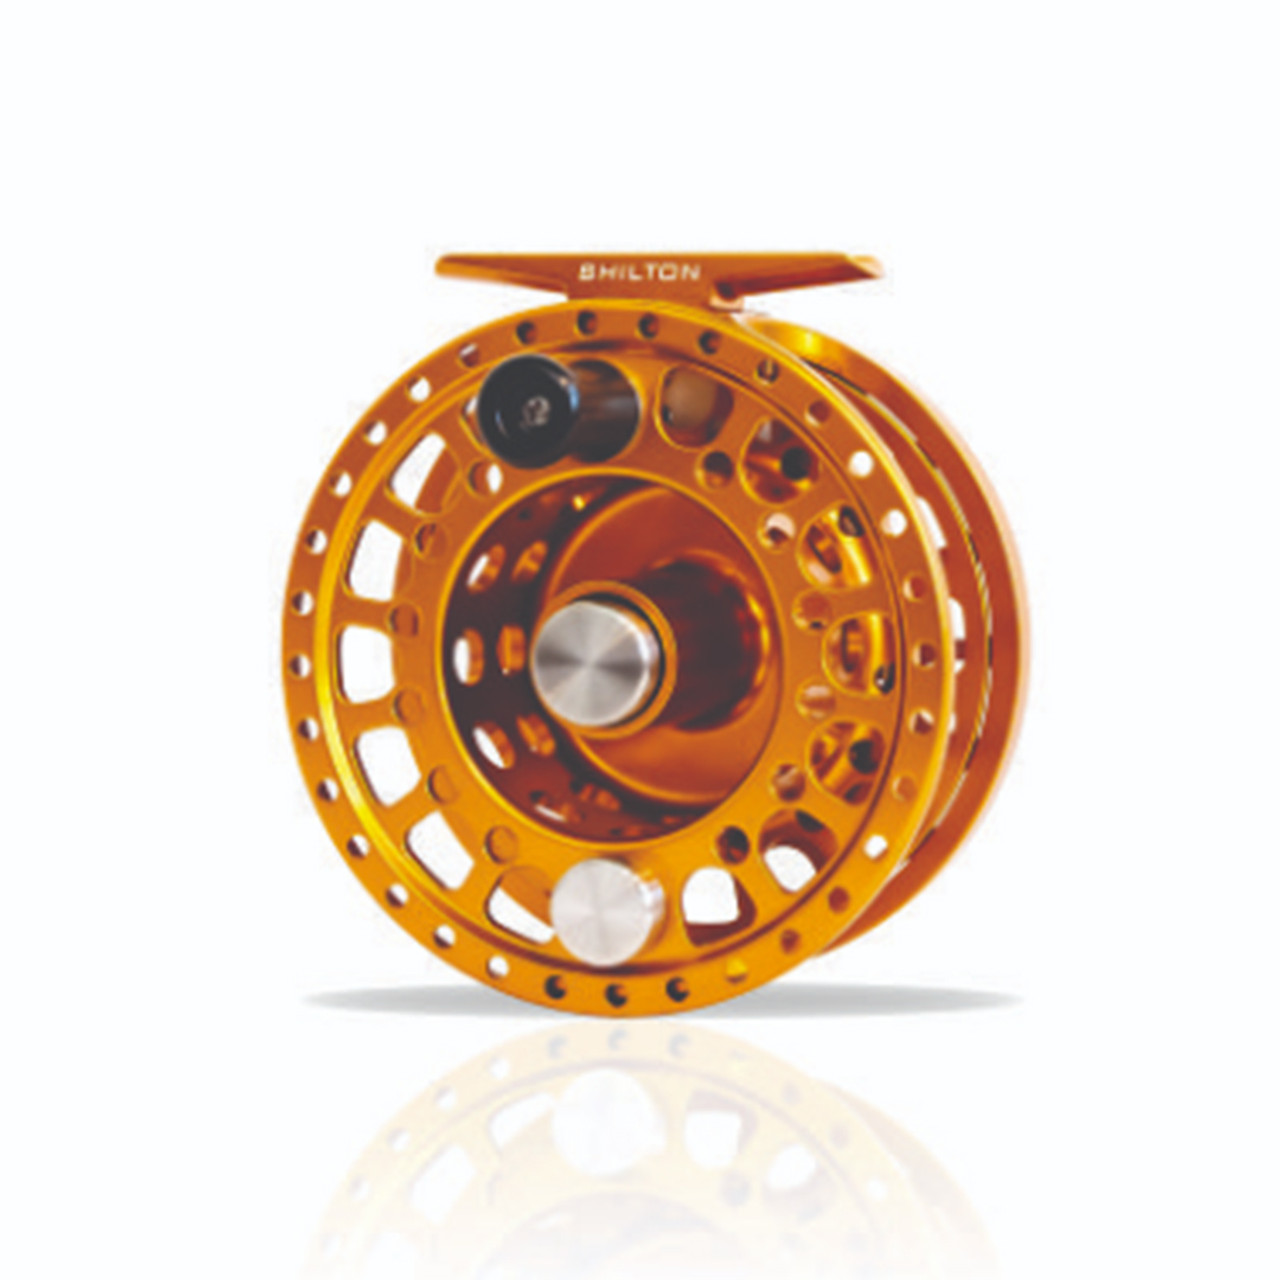 Shilton Reels  Gordy & Sons Outfitters